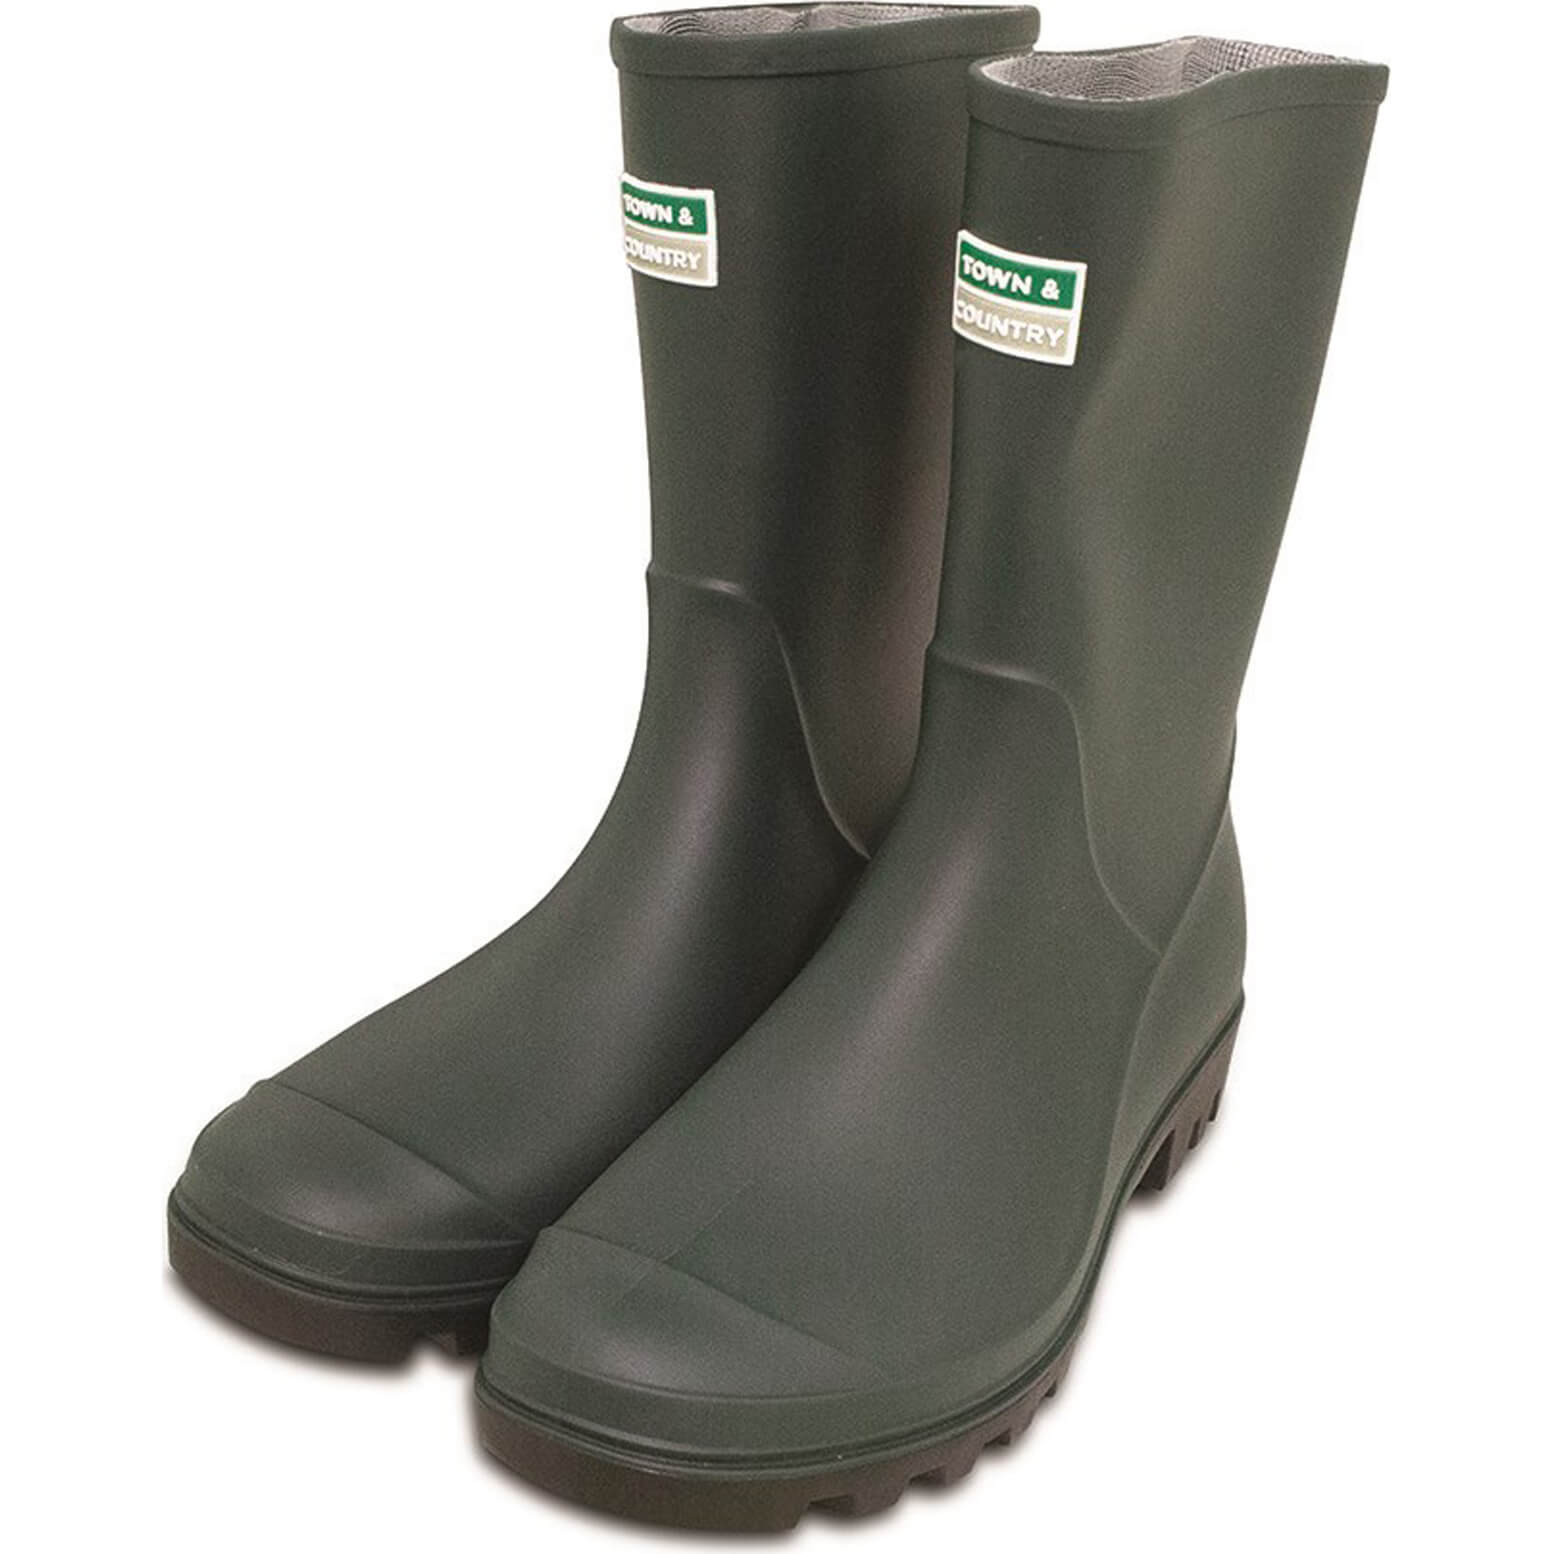 Town and Country Eco Essential Half Length Wellington Boots Green Size 9